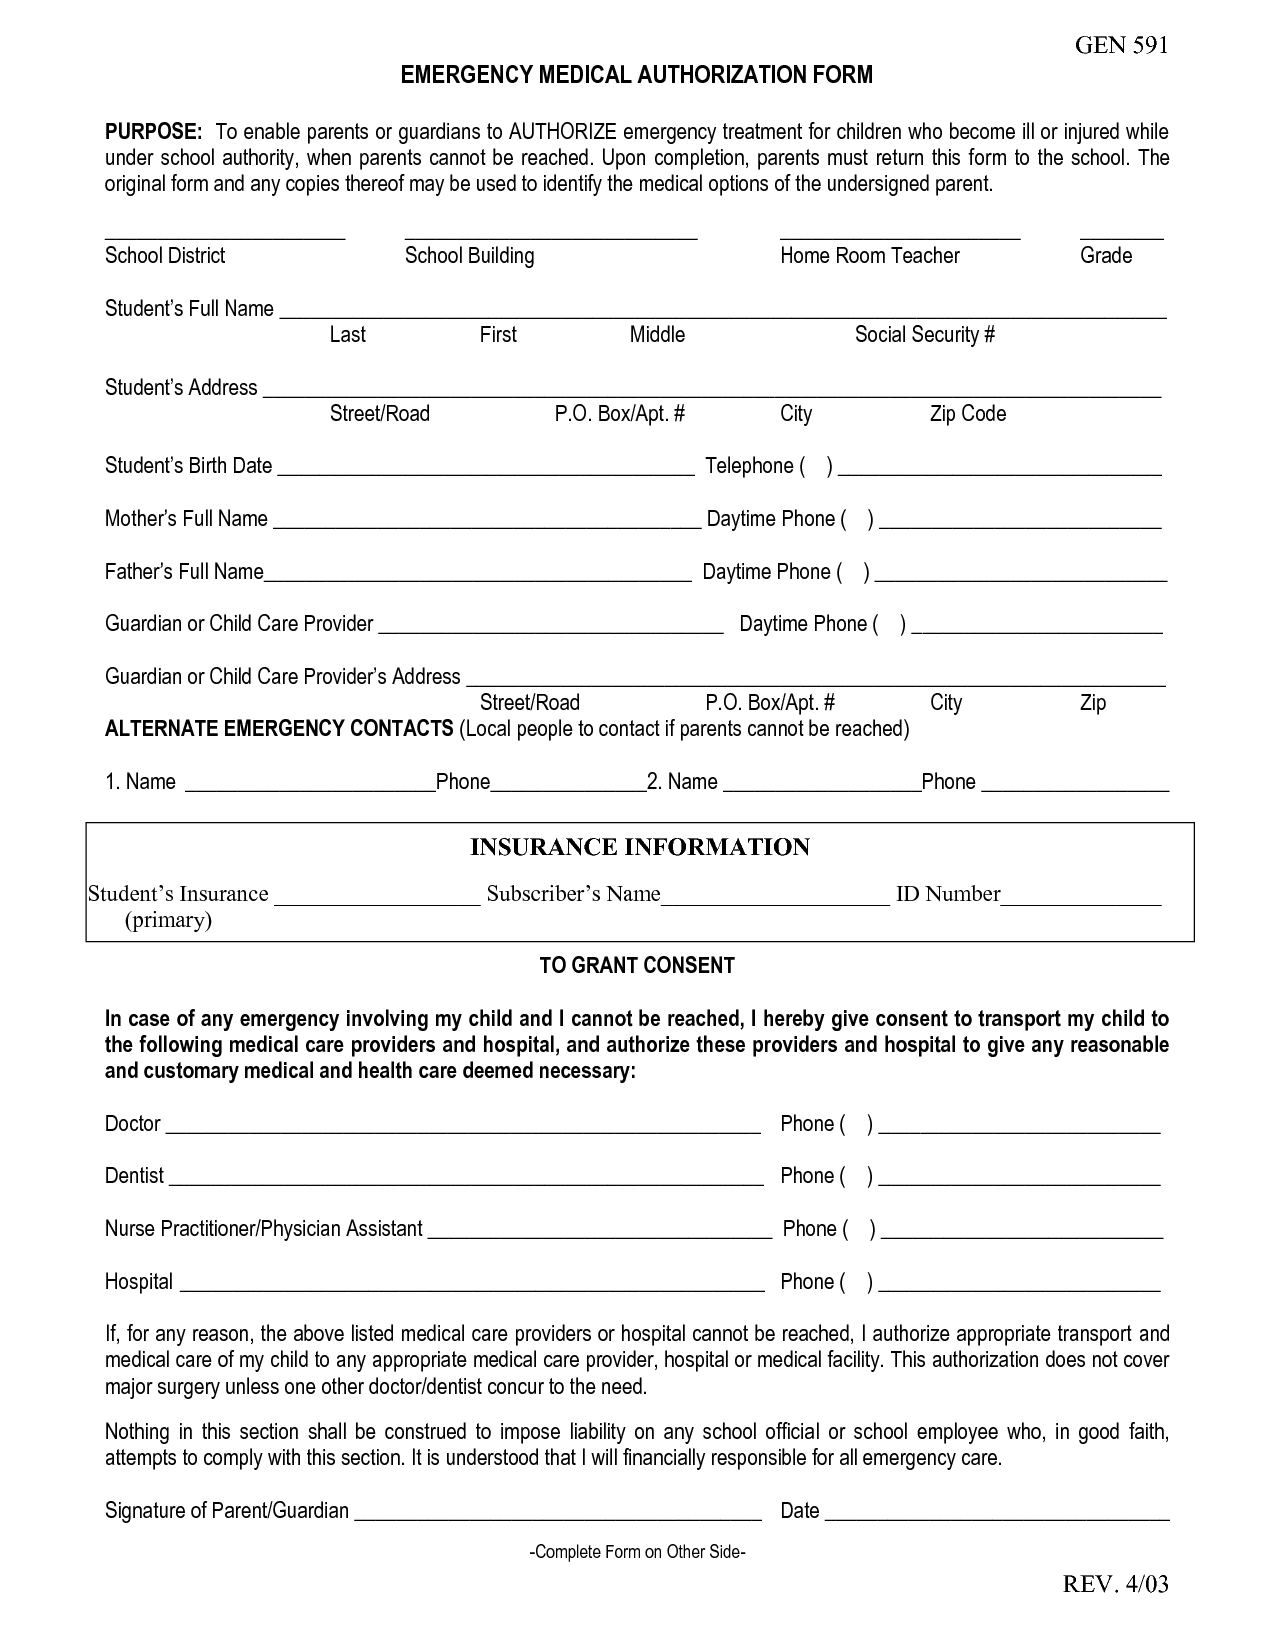 printable-emergency-medical-authorization-form-printable-forms-free